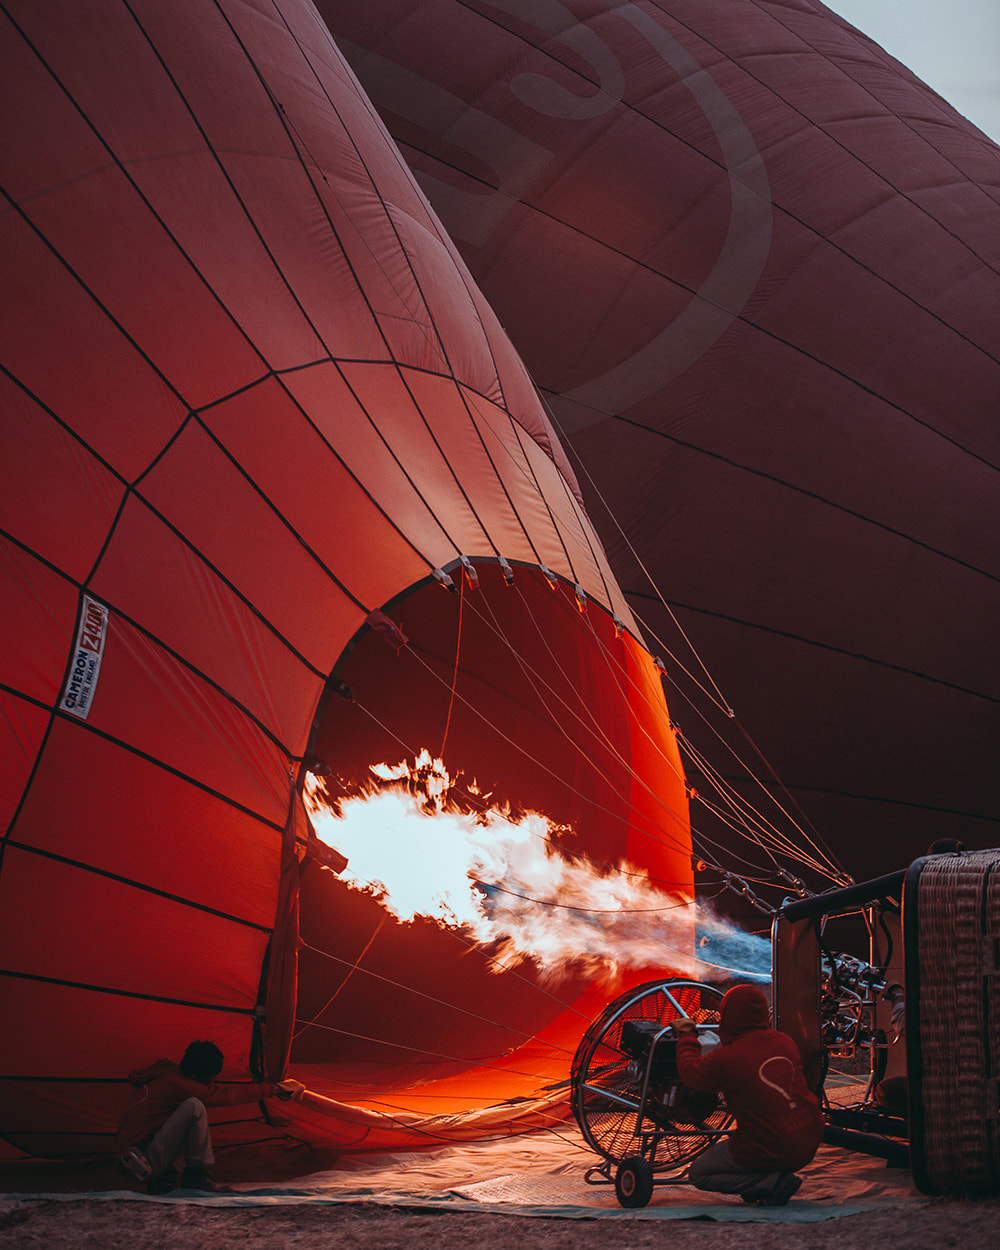 10 of the Best Places in the World to go Hot Air Ballooning: Old Bagan, Myanmar (Burma)